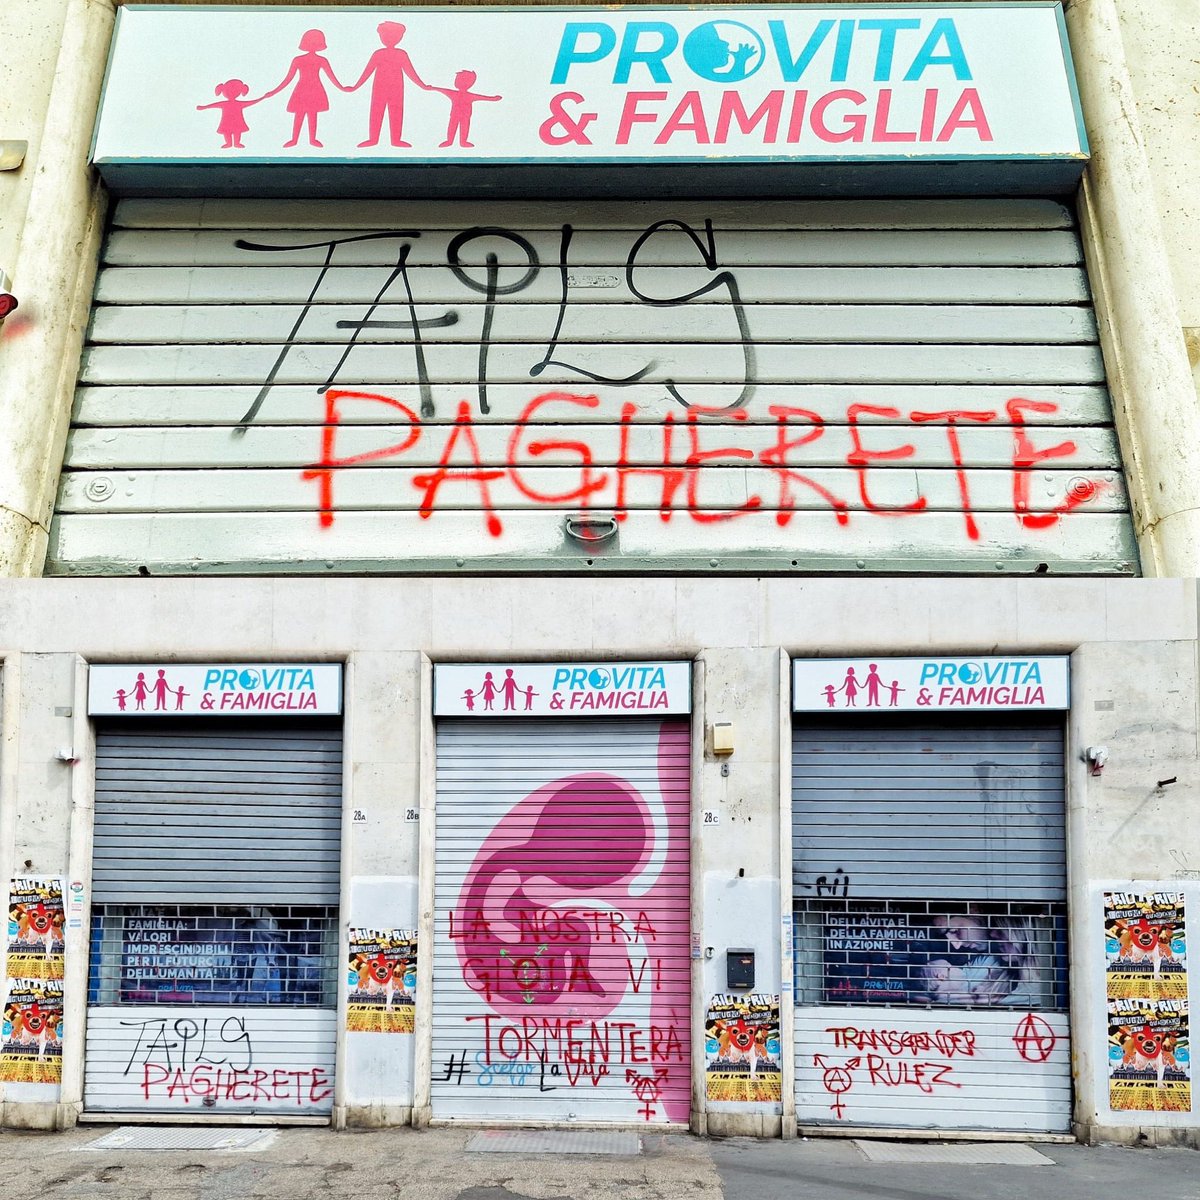 🔴 12 ATTACKS IN 3 YEARS 
IT MEANS = PERSECUTION

“YOU WILL PAY”
“WE'LL NOT GIVE YOU PEACE”
“TRANS RIOT”

These are some of the threats found this morning on the shutters of @ProVitaFamiglia national headquarters in Rome, Italy, made during the night with spray cans by LGBTQAI+